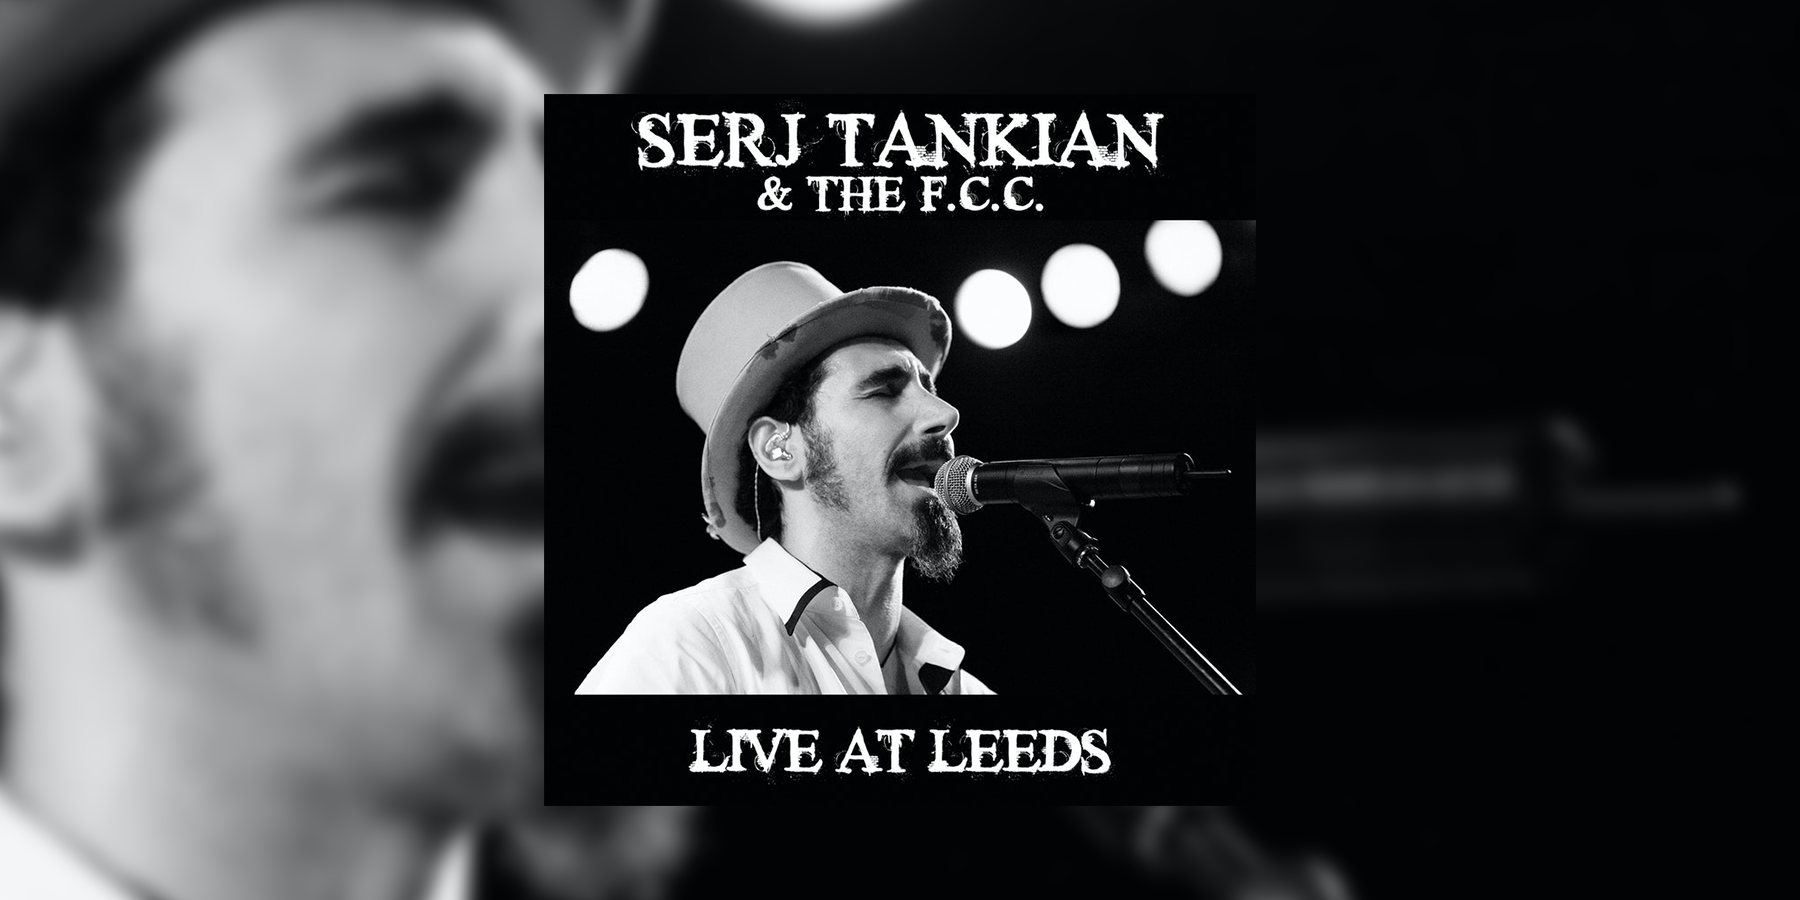 Serj Tankian Of System Of A Down Announces Live Solo Album Live At Leeds For April 2022 Release, Teases Live Version Of “Empty Walls”